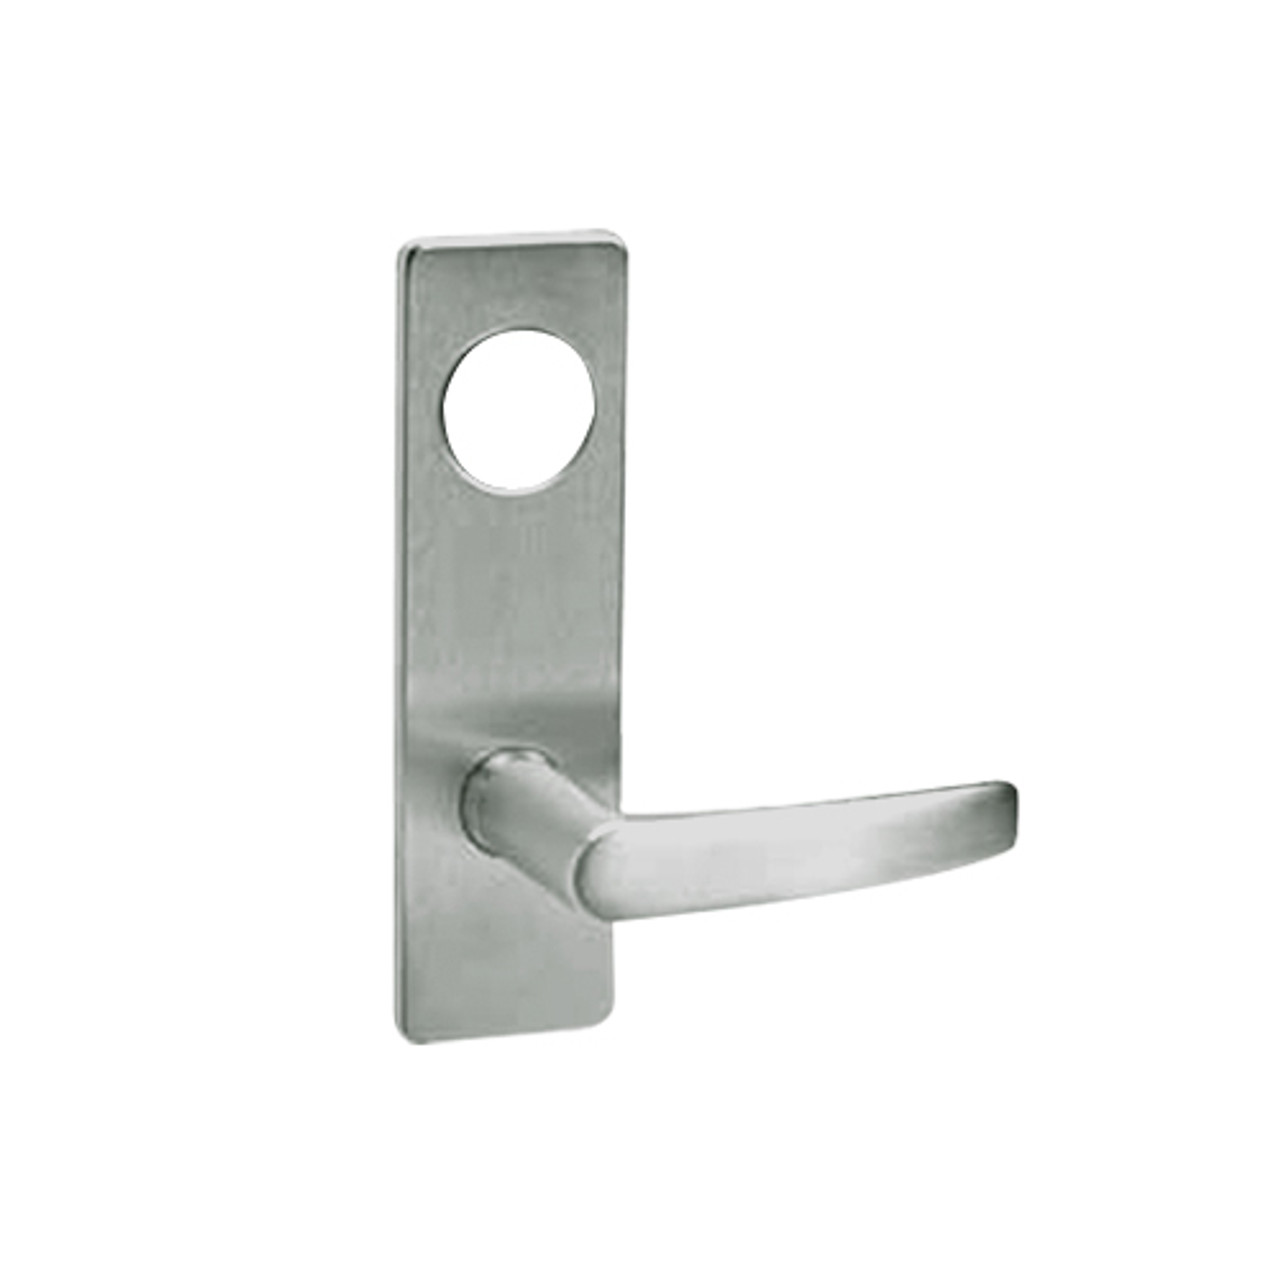 ML2069-ASP-619-LC Corbin Russwin ML2000 Series Mortise Institution Privacy Locksets with Armstrong Lever in Satin Nickel